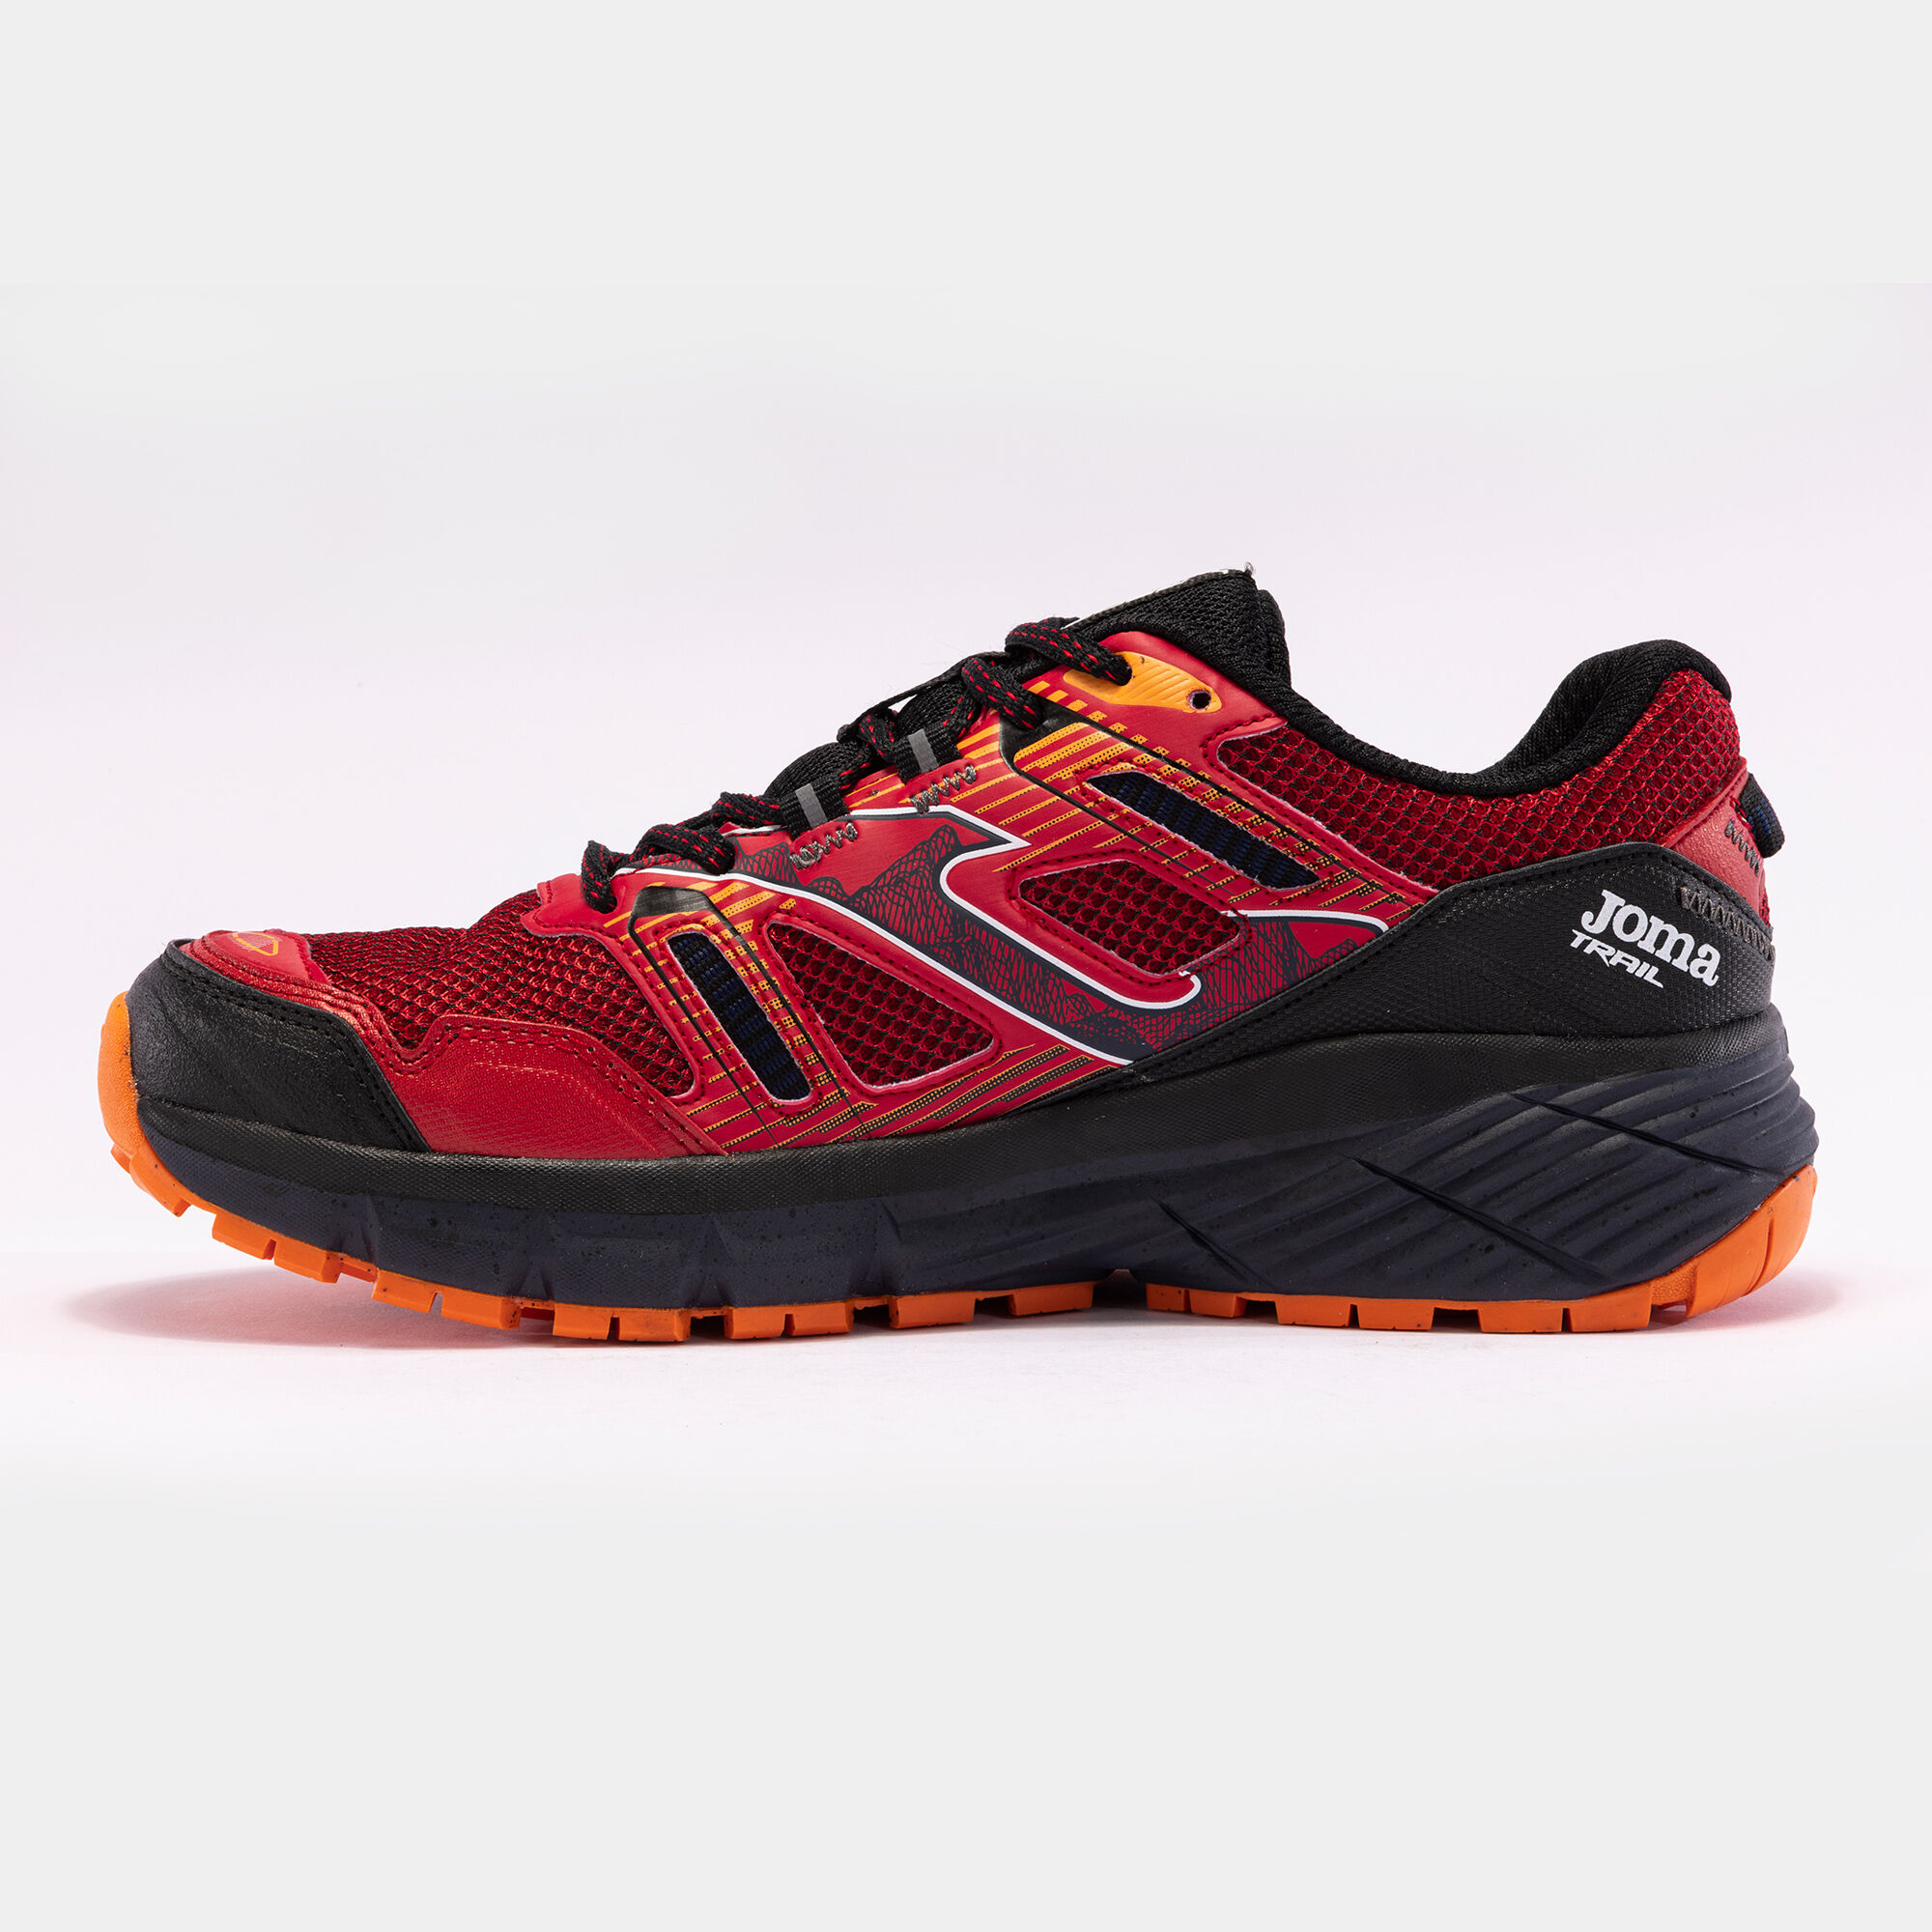 Chaussures trail running Recon 24 homme rouge